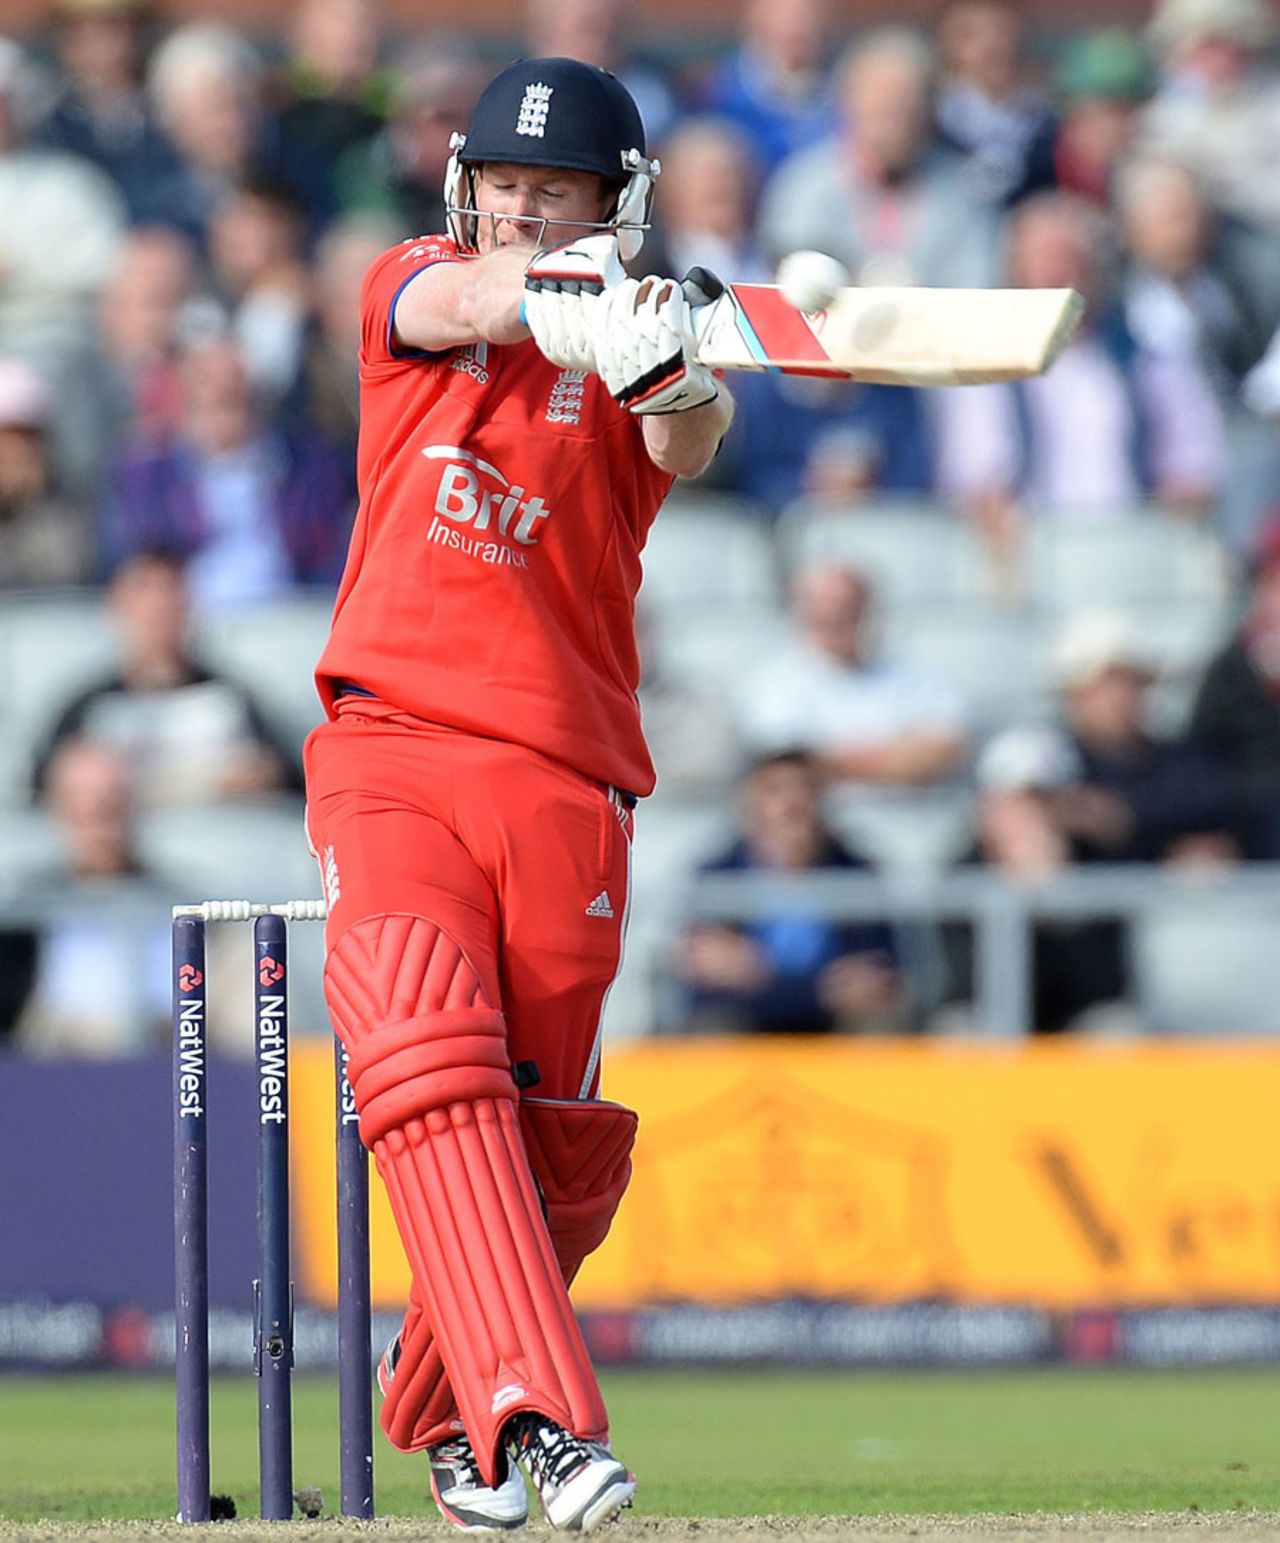 Eoin Morgan needed another big innings for his side, England v Australia, 2nd NatWest ODI, Old Trafford, September 8, 2013